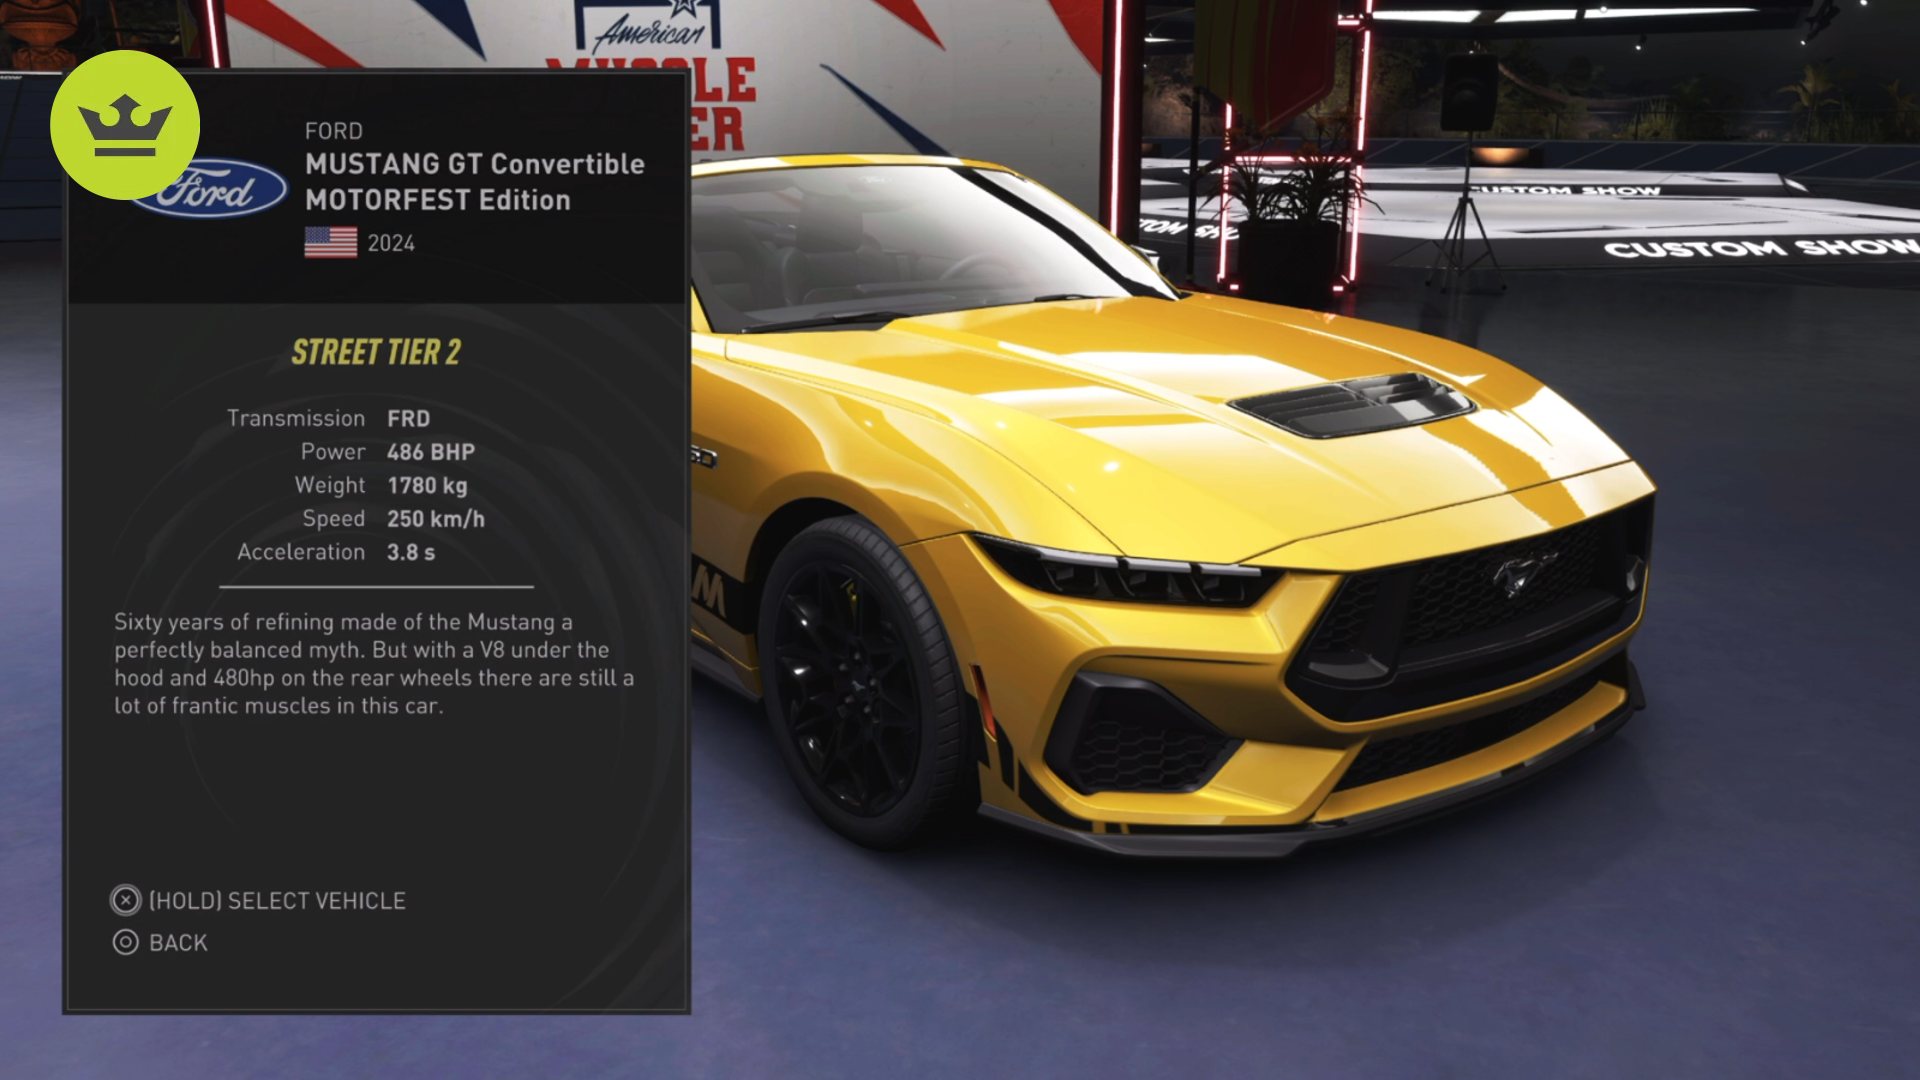 3 Must Have Cars in The Crew Motorfest